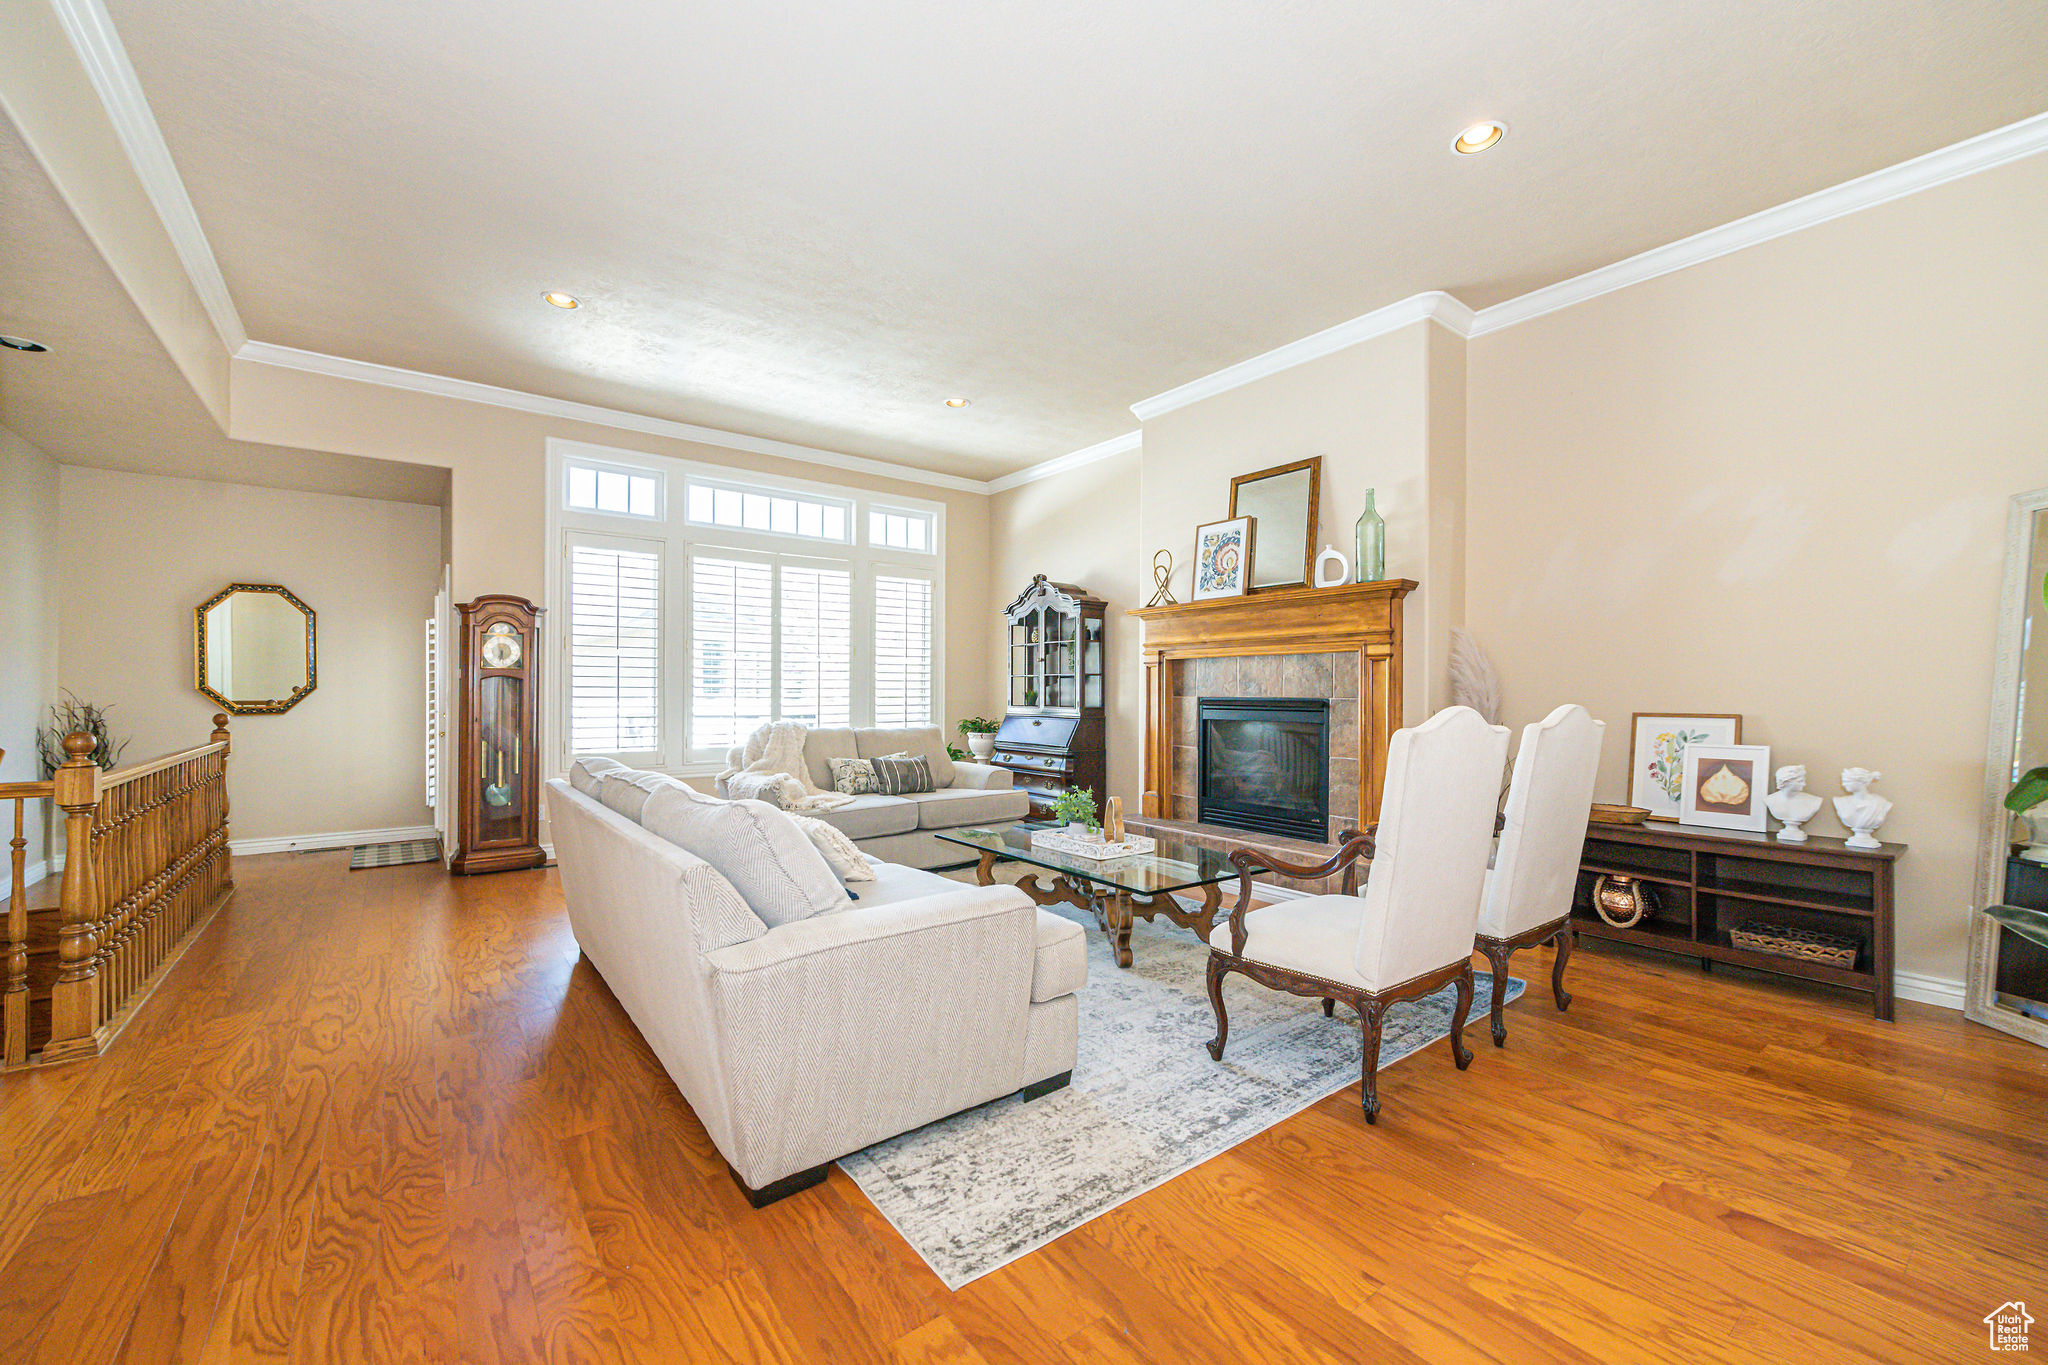 Living room with a tile fireplace, light wood-type flooring, and crown molding